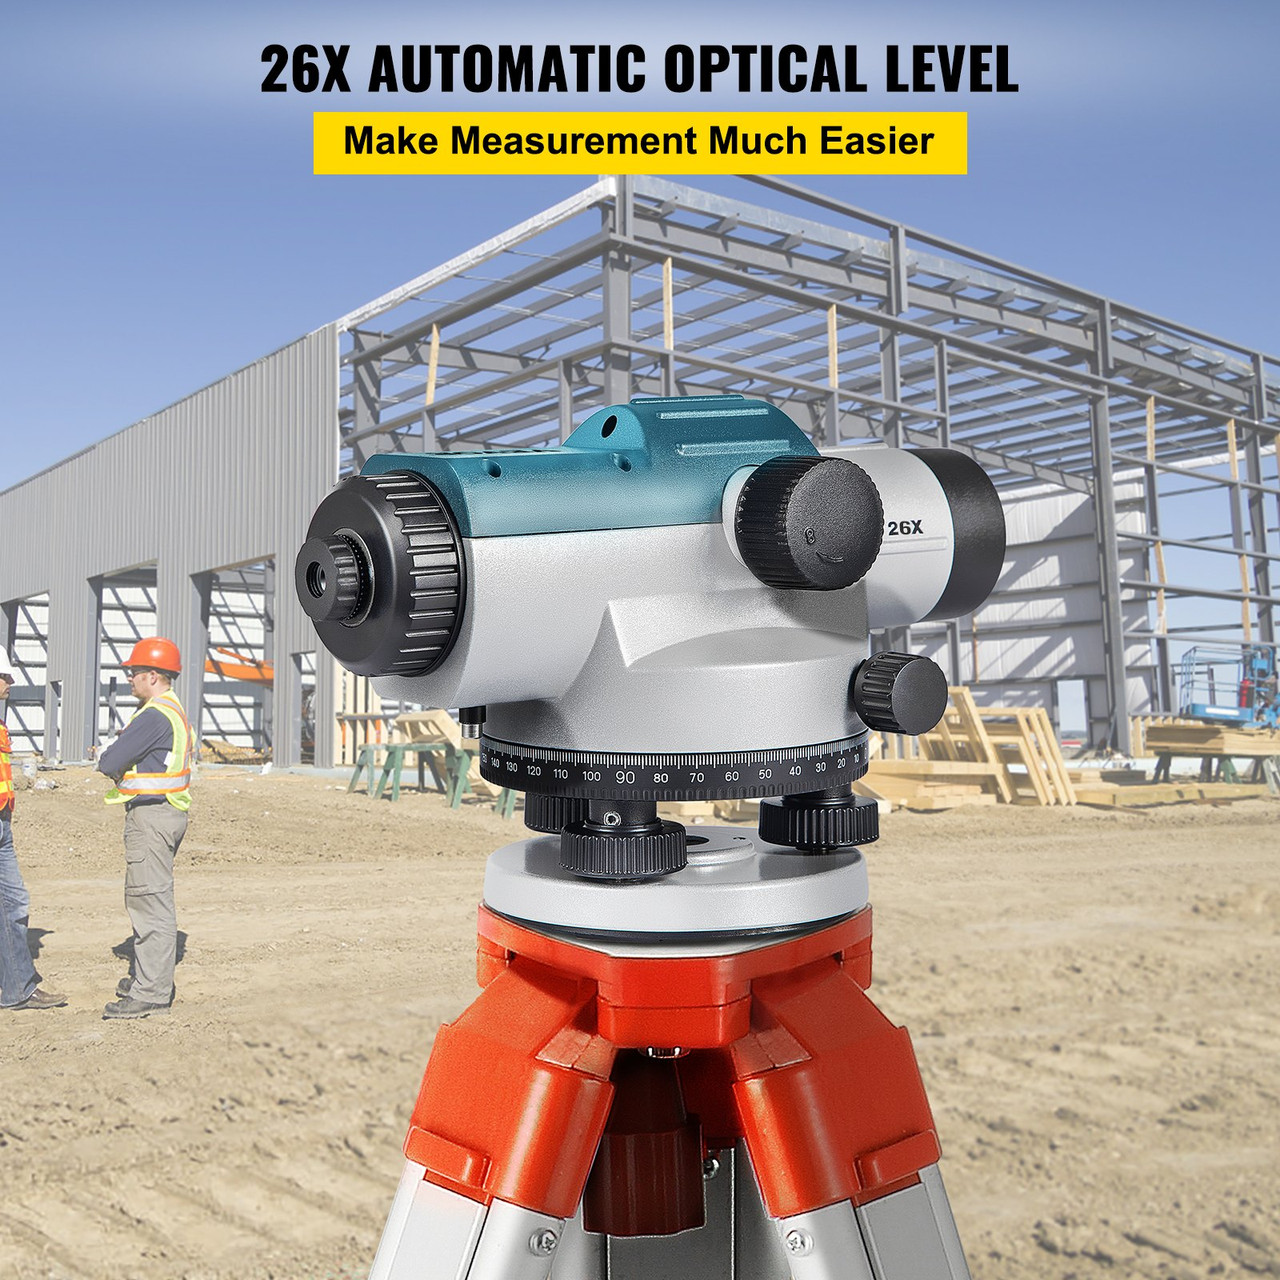 Automatic Optical Level 26X Optical Auto Level Kit High Precision Height/Distance/Angle Level Measure Builders Level with Magnetic Dampened Compensator and Transport Lock, IP54 Waterproof